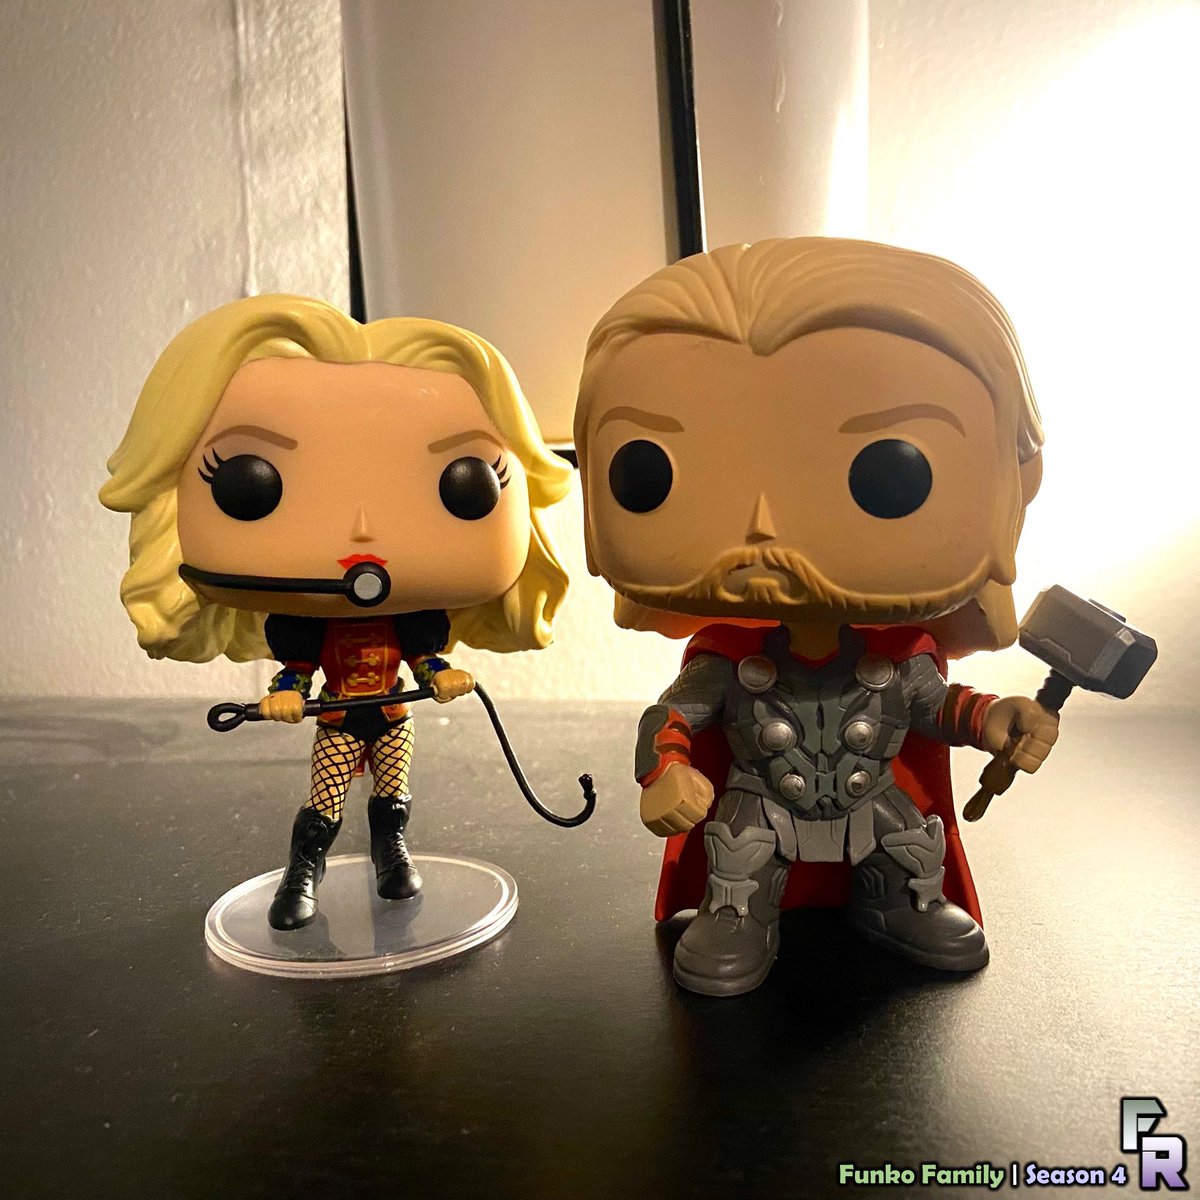 BRITNEY: “I didn’t know they were letting princes in the Princess Council now.”

THOR: “Oh, no. You see, I’m a God. I’m higher than a royal, Miss… I supposed you’re a circus conductor?”

BRITNEY: “Princess Of Pop, hello! This is just one of my iconic costumes.”

#Funko https://t.co/4dRdO2FkES